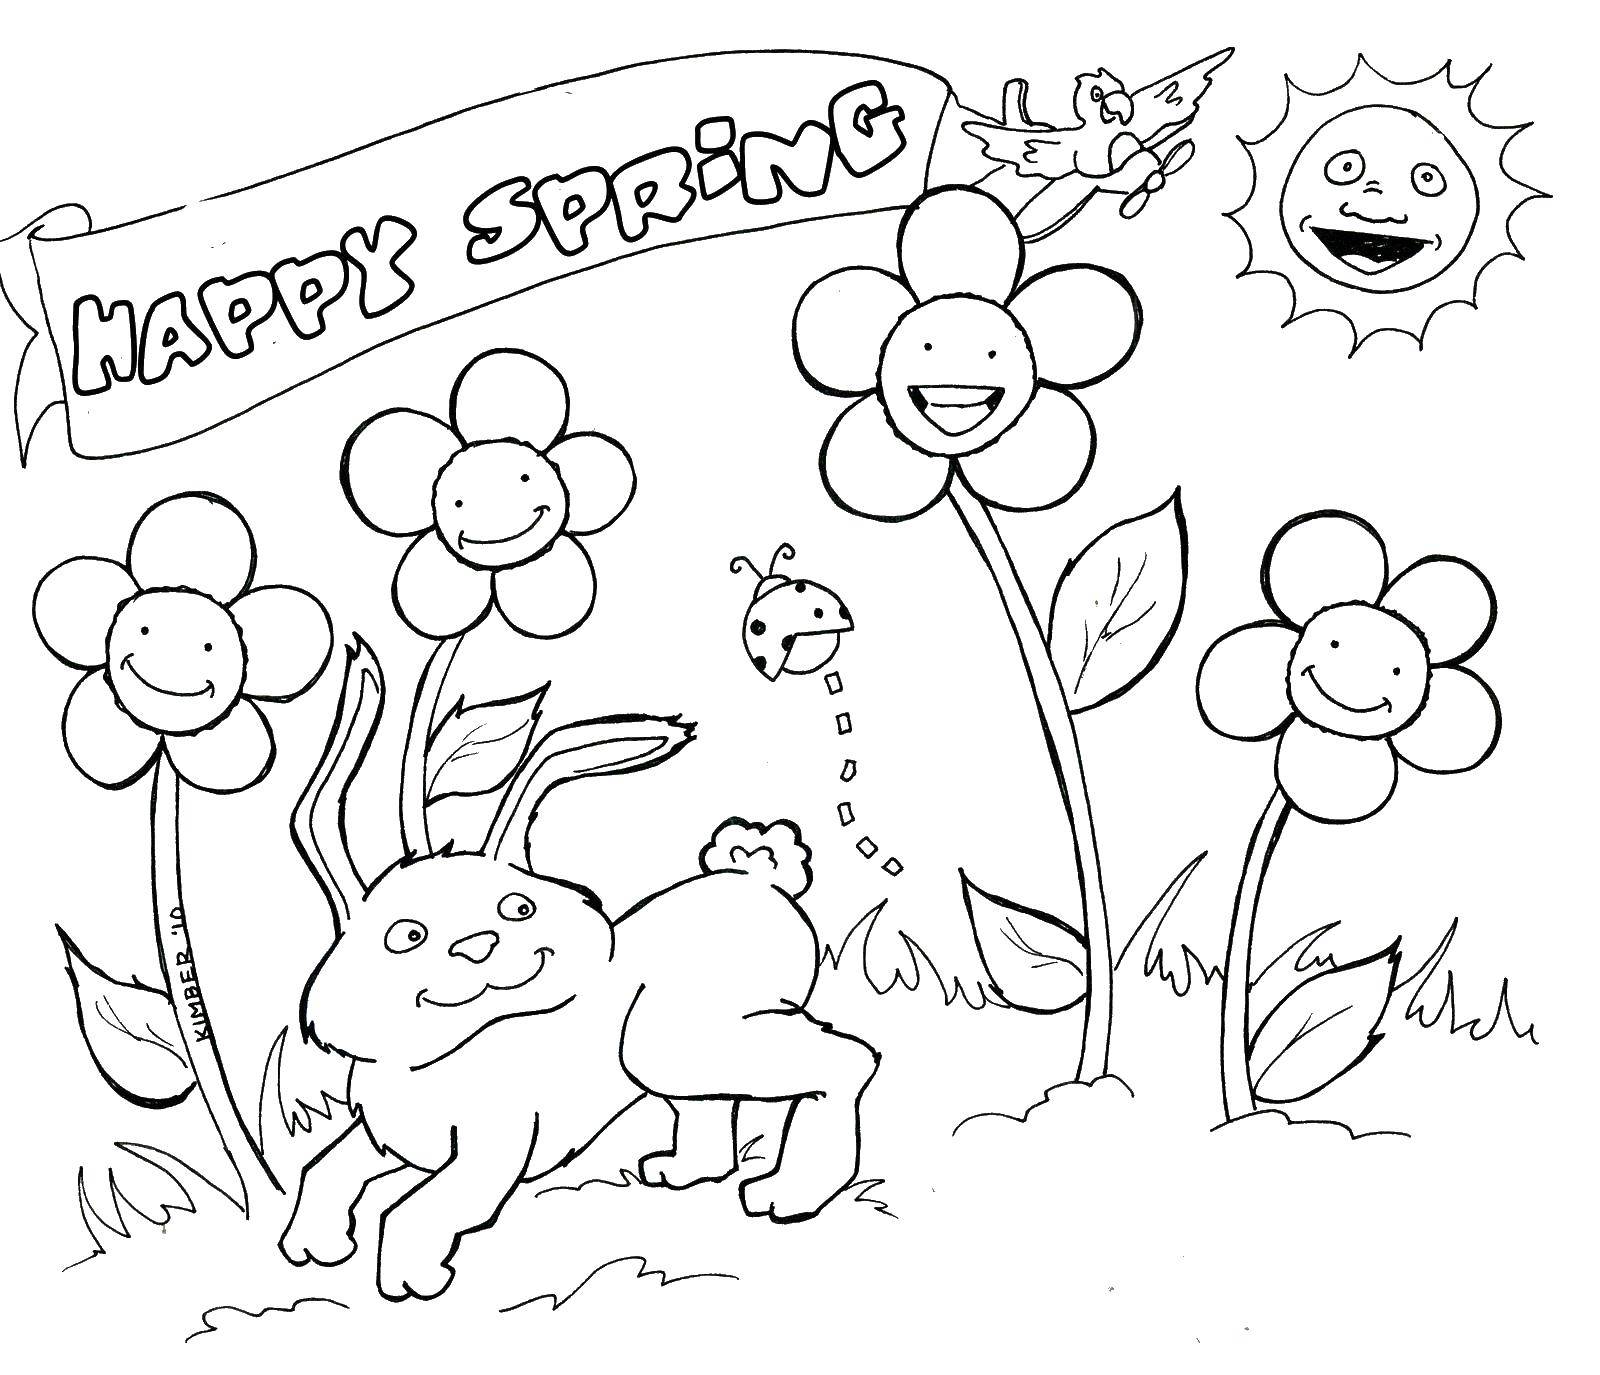 Coloring Happy spring. Category Spring. Tags:  spring animals, flowers.